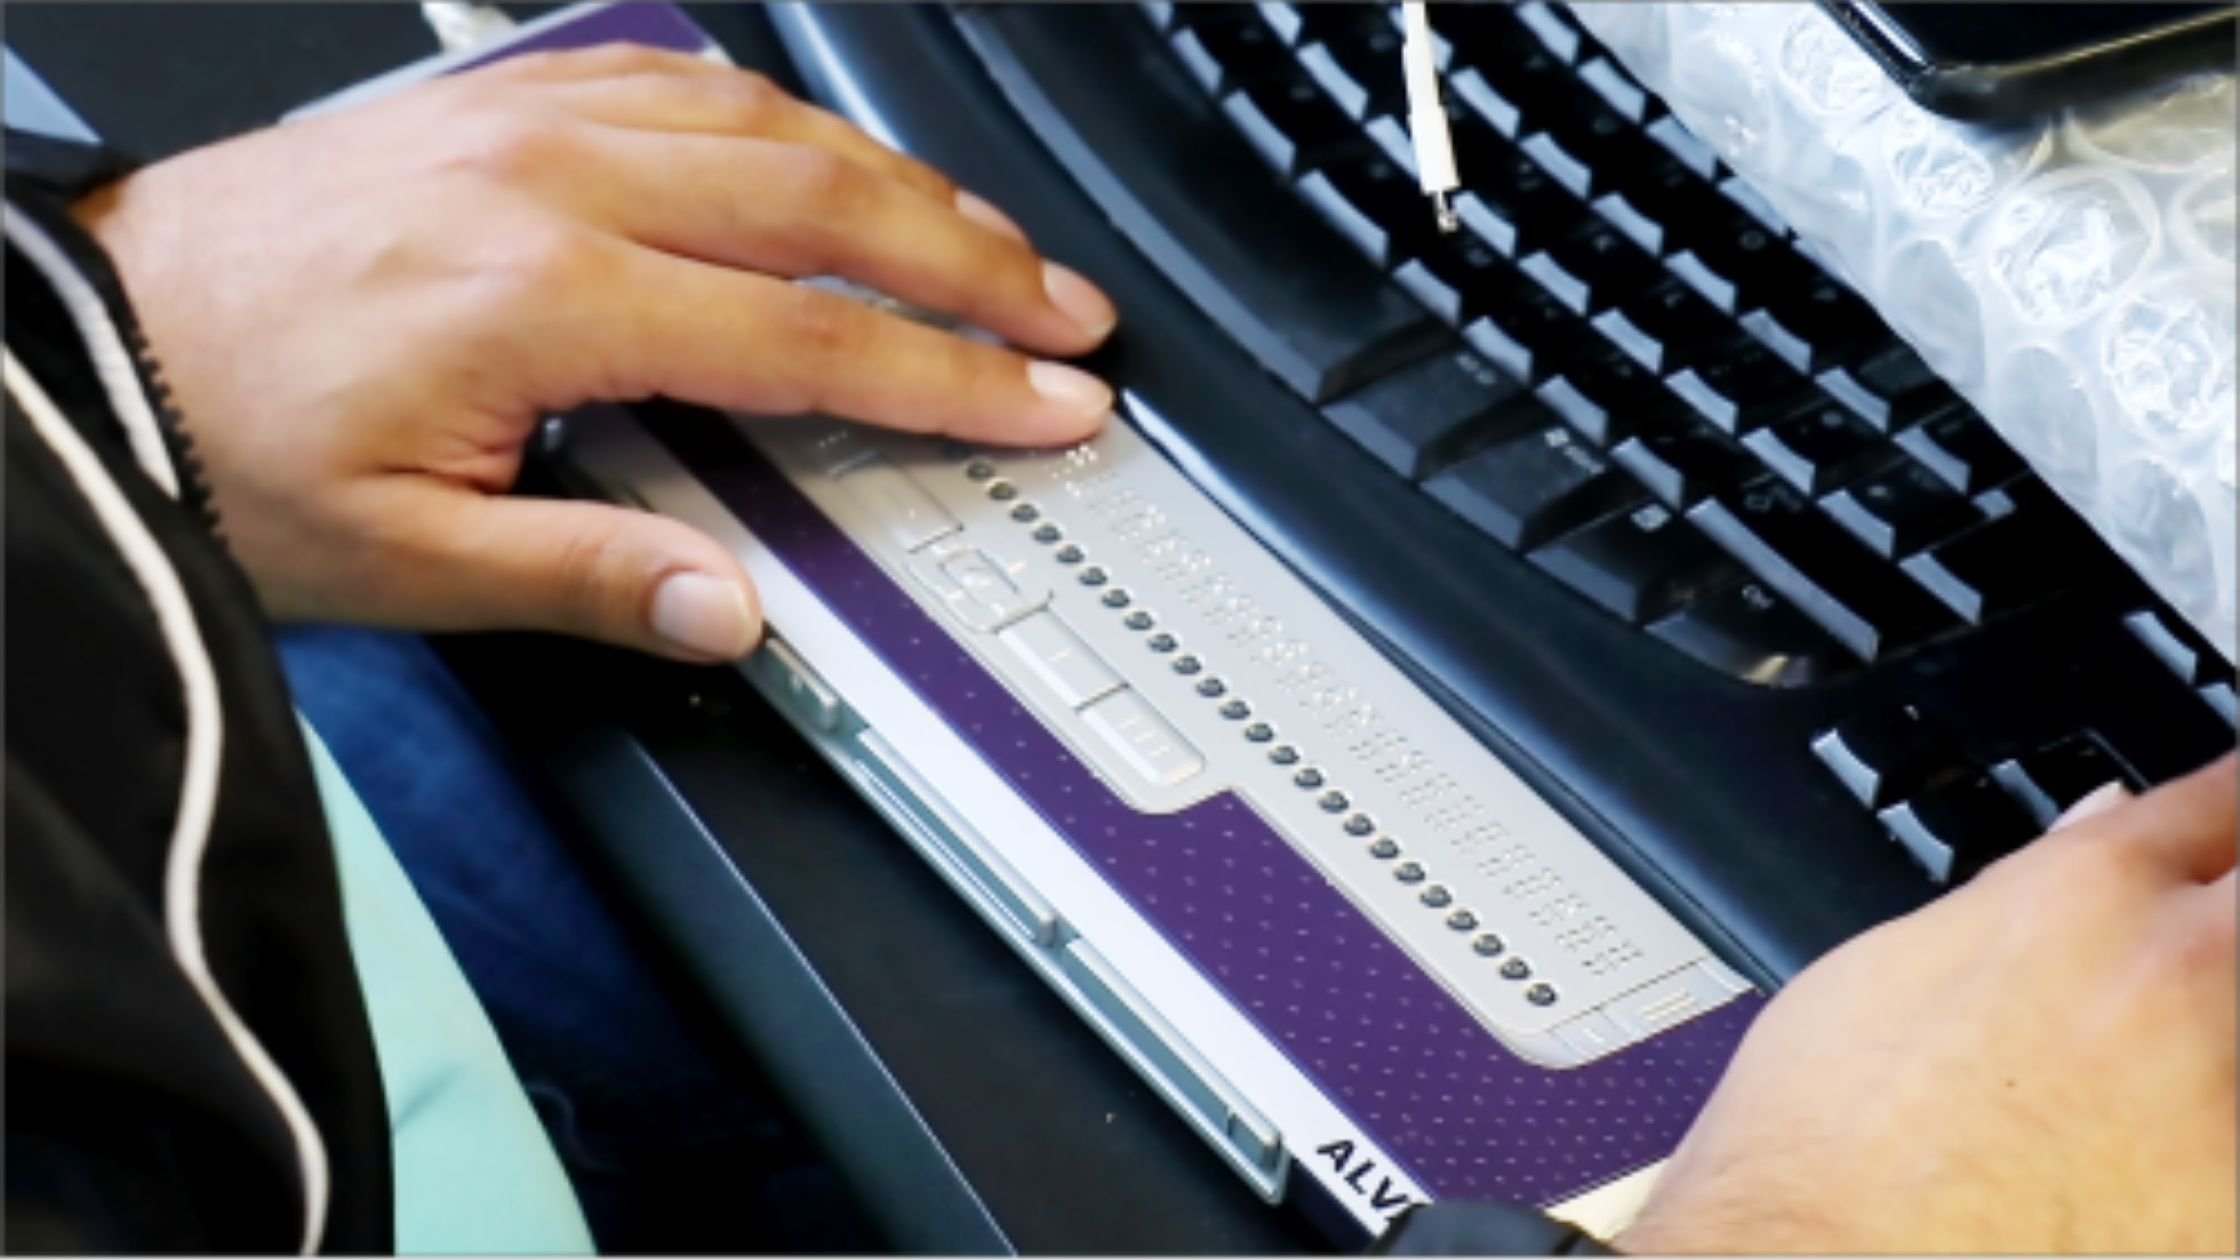 Image shows a hand using a Braille display and computer keyboard-1